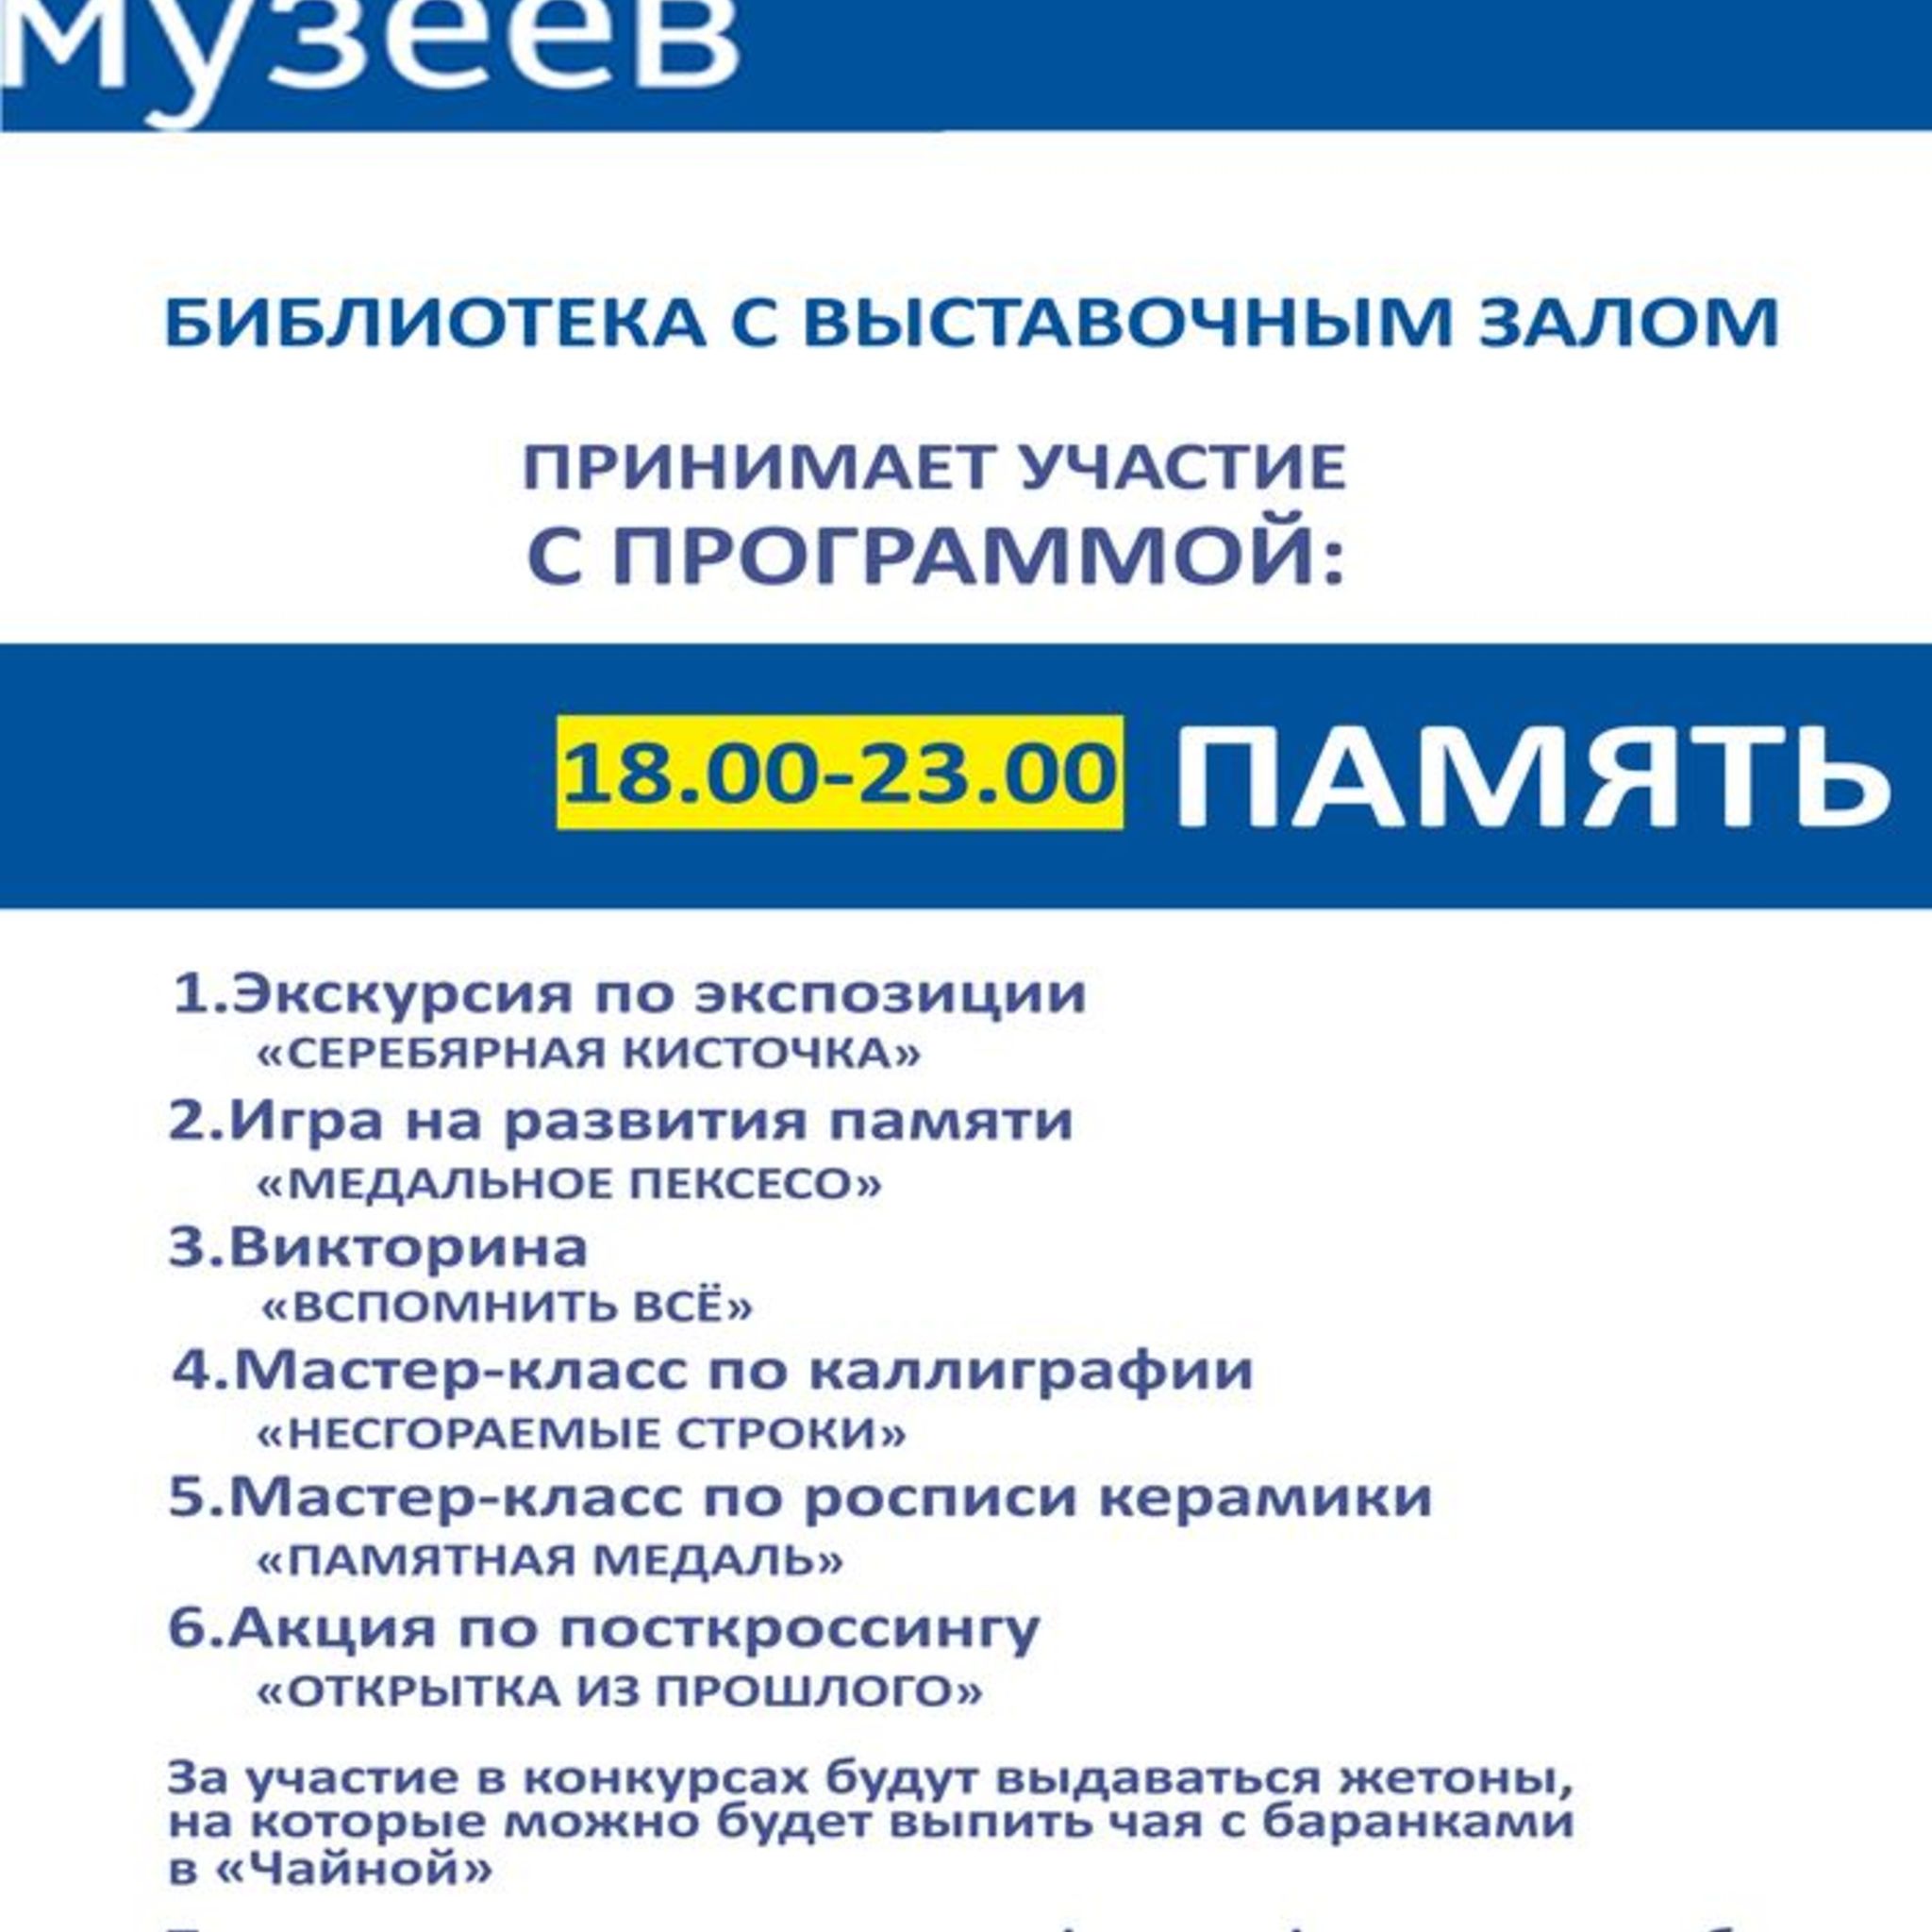 The Night of Museums 2015 in the Exhibition Hall of the Moscow region